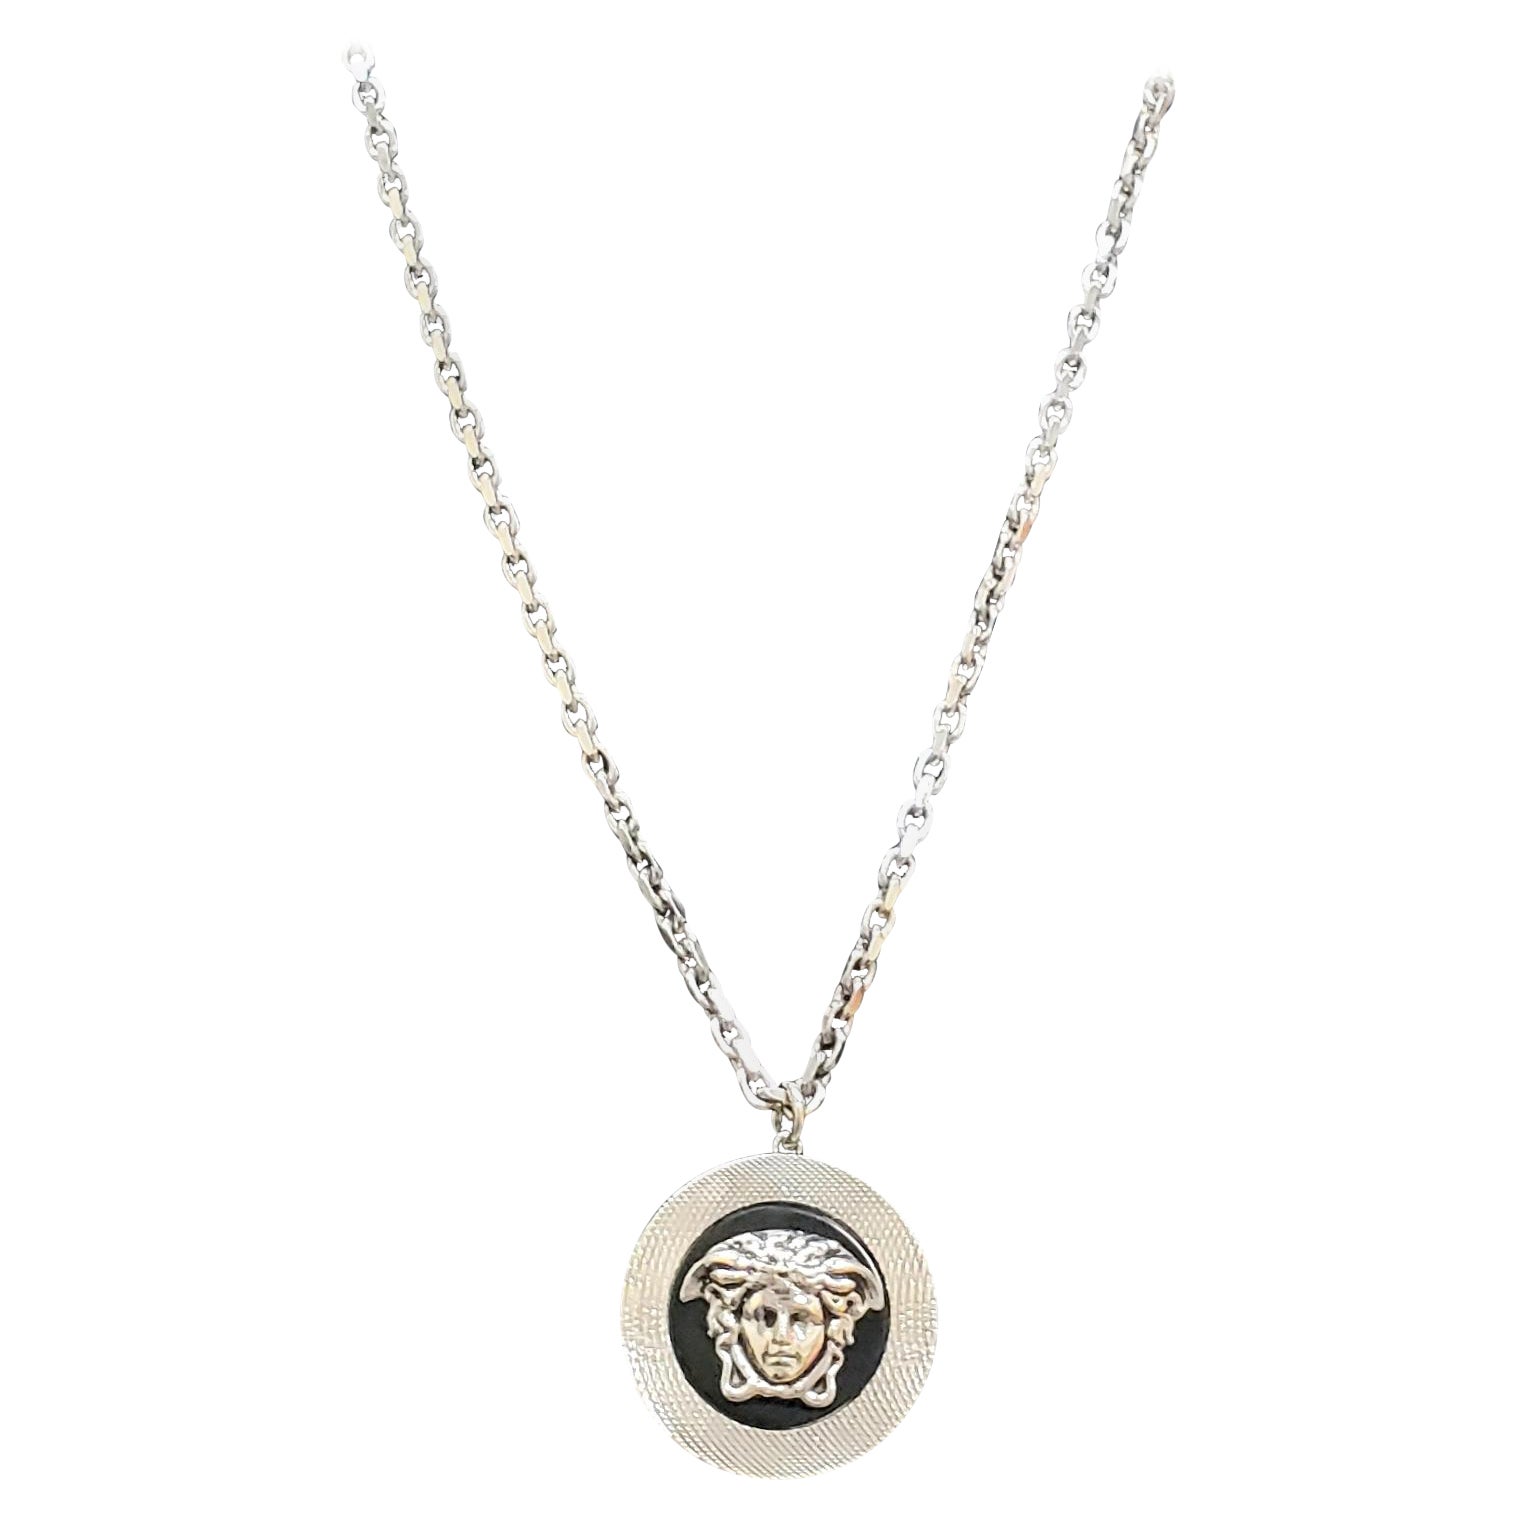 Spring 2011 L# 21 NEW VERSACE SILVER TONE METAL MEDUSA NECKLACE For Sale